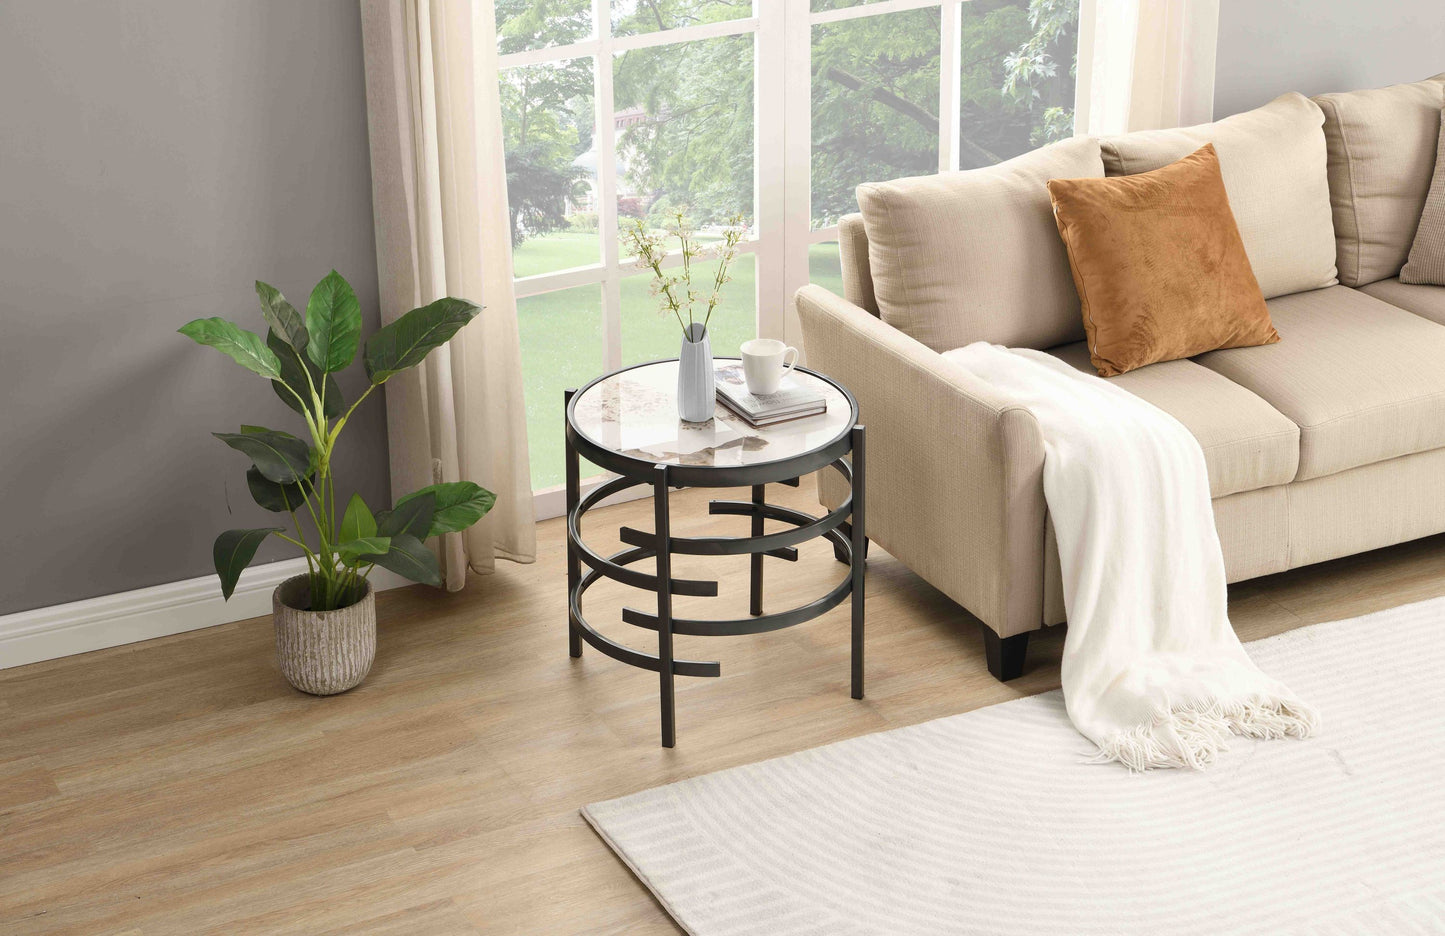 Elegant Pandora Sintered Stone End Table, Darker Gray Small Coffee Table for Living Room 20.67''W x 20.67''D x 21.65''H